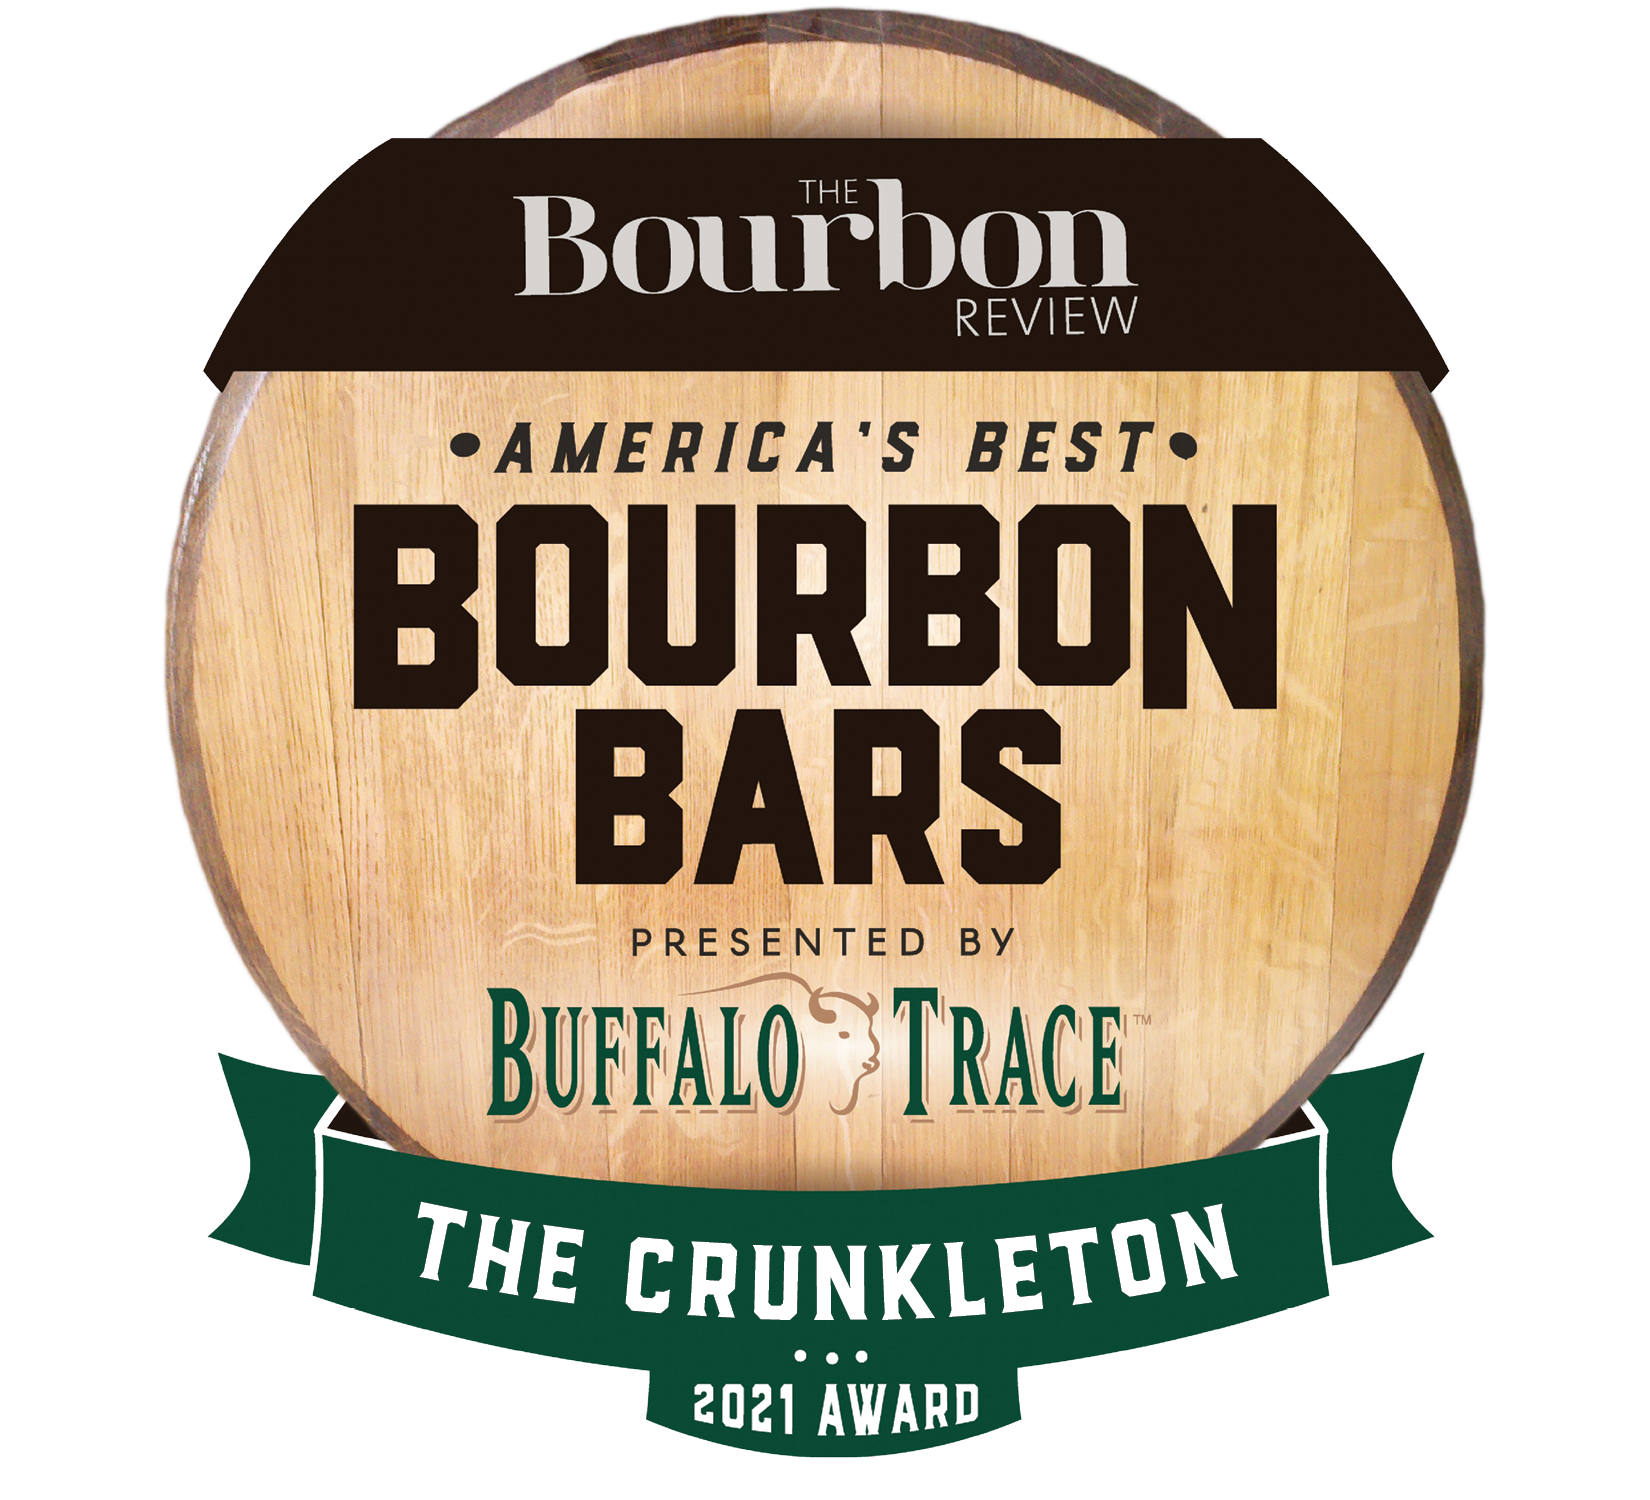 Bourbon Review names The Crunkleton as one of the Best Bourbon Bars